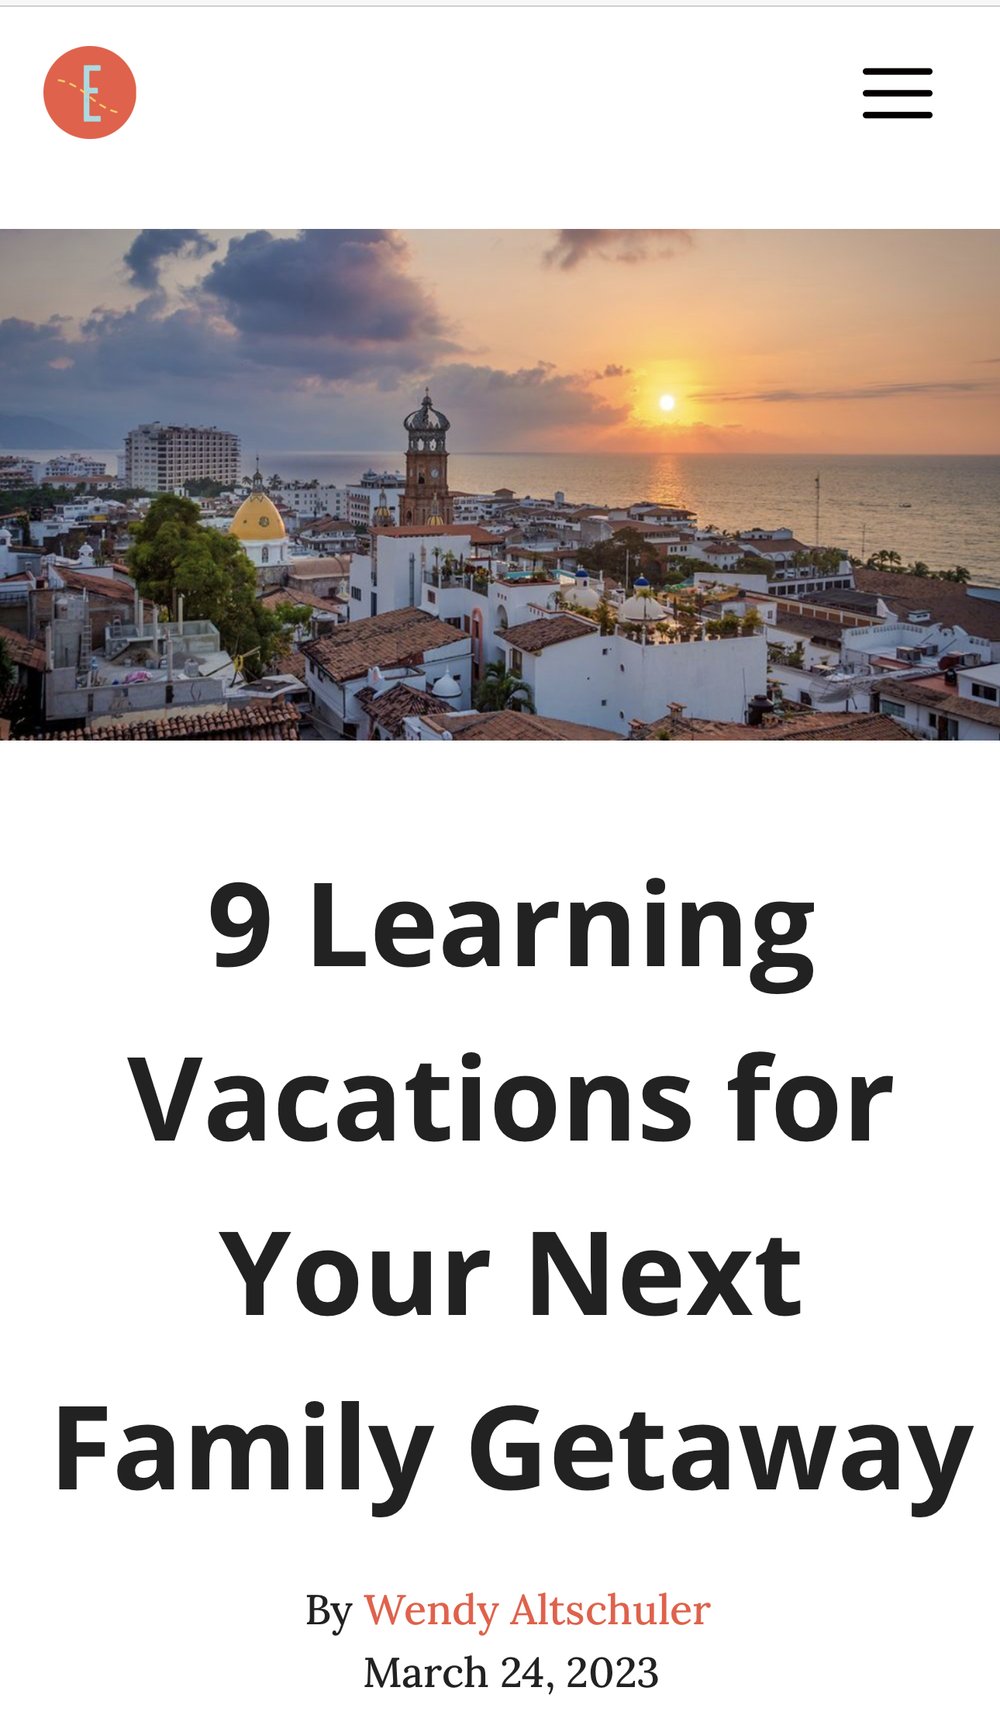 9 Learning Vacations for Your Next Family Getaway